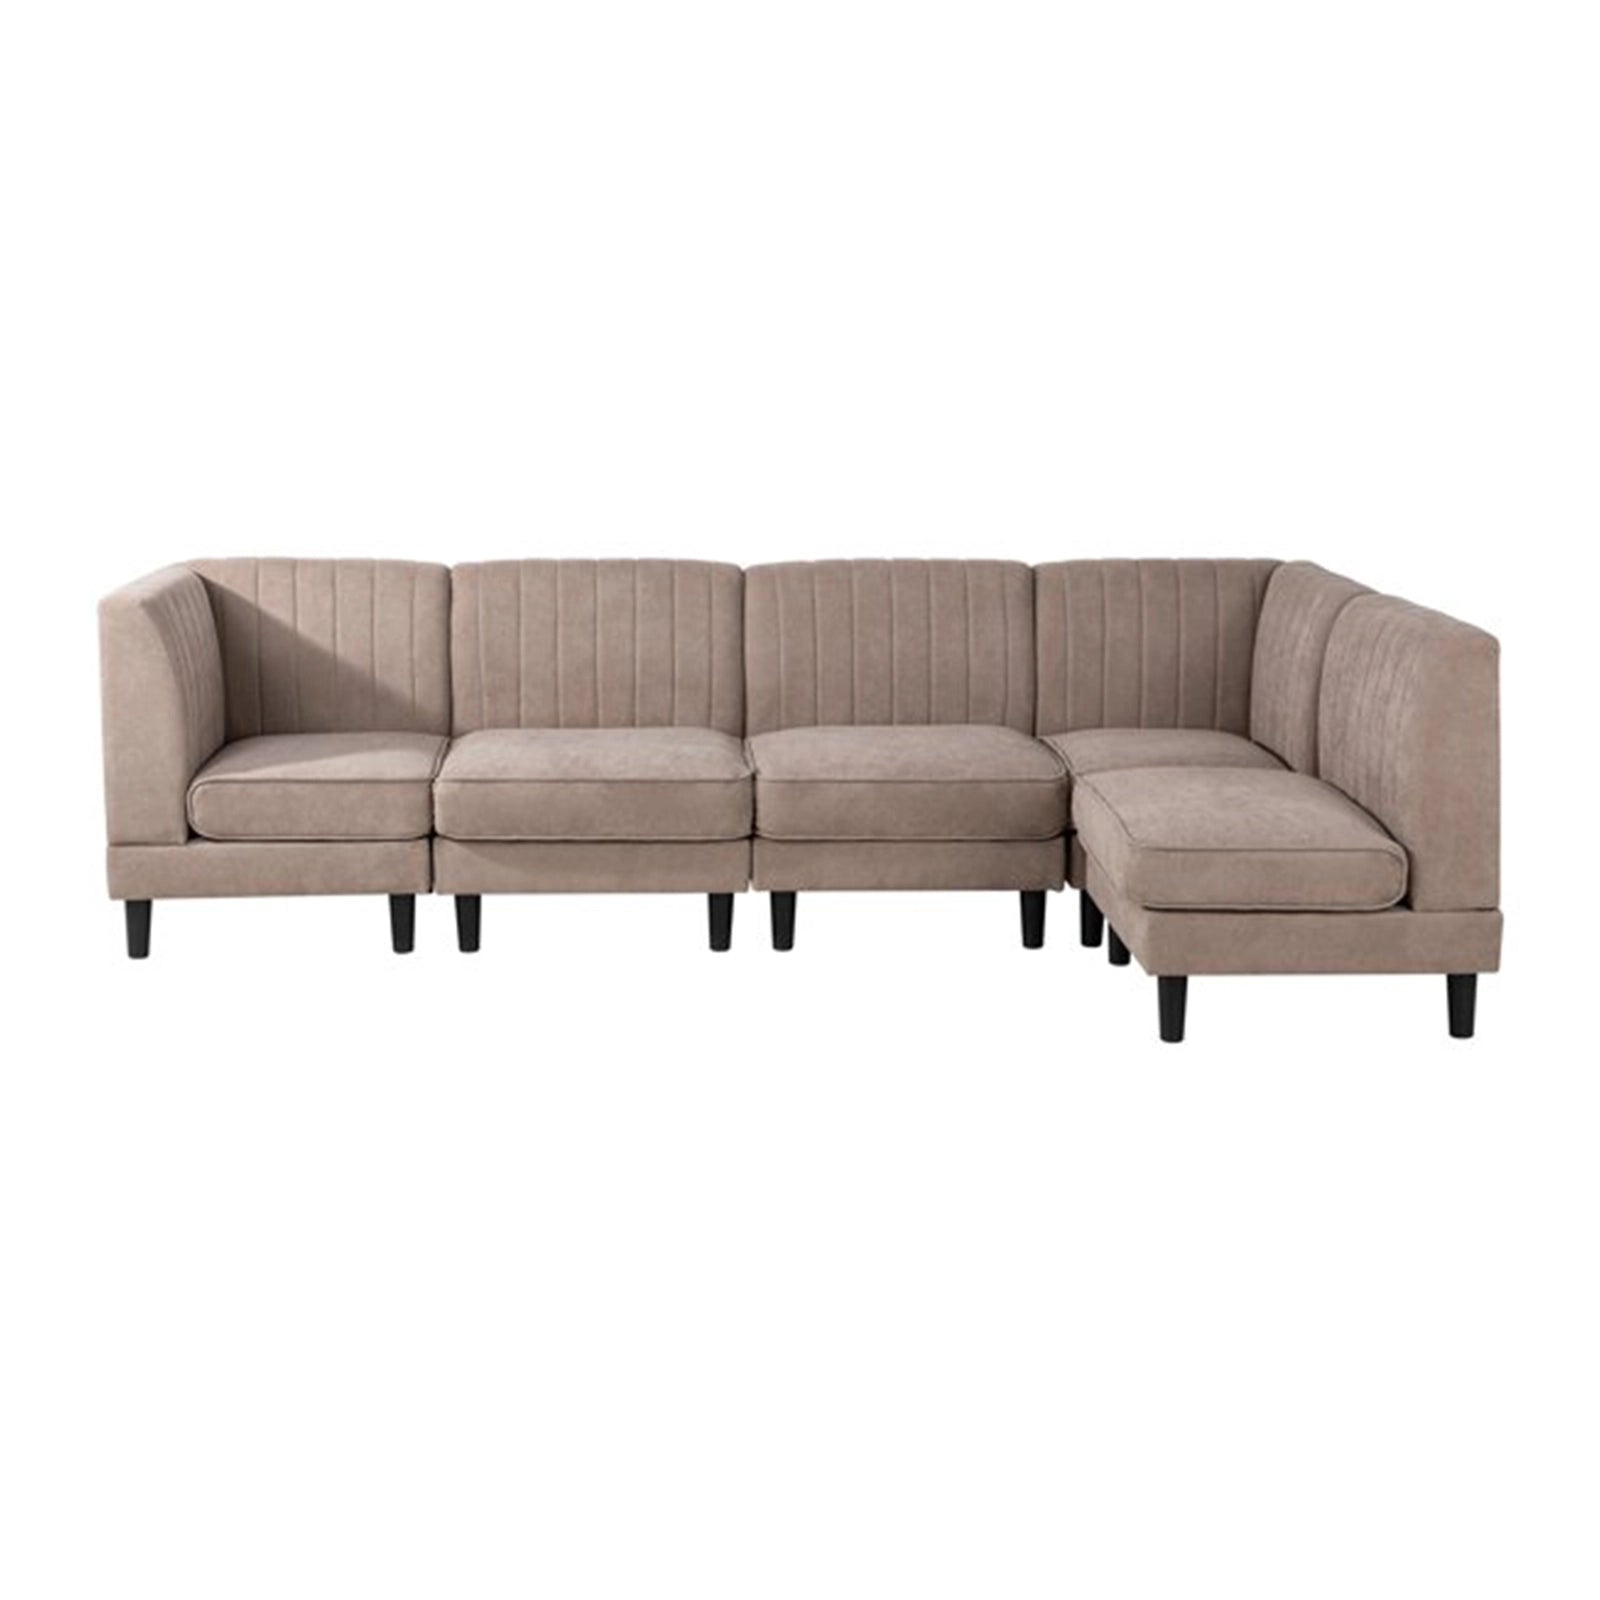 Modern Fabric Reversible Convertible 5- Seat Sectional Chaise Sofa